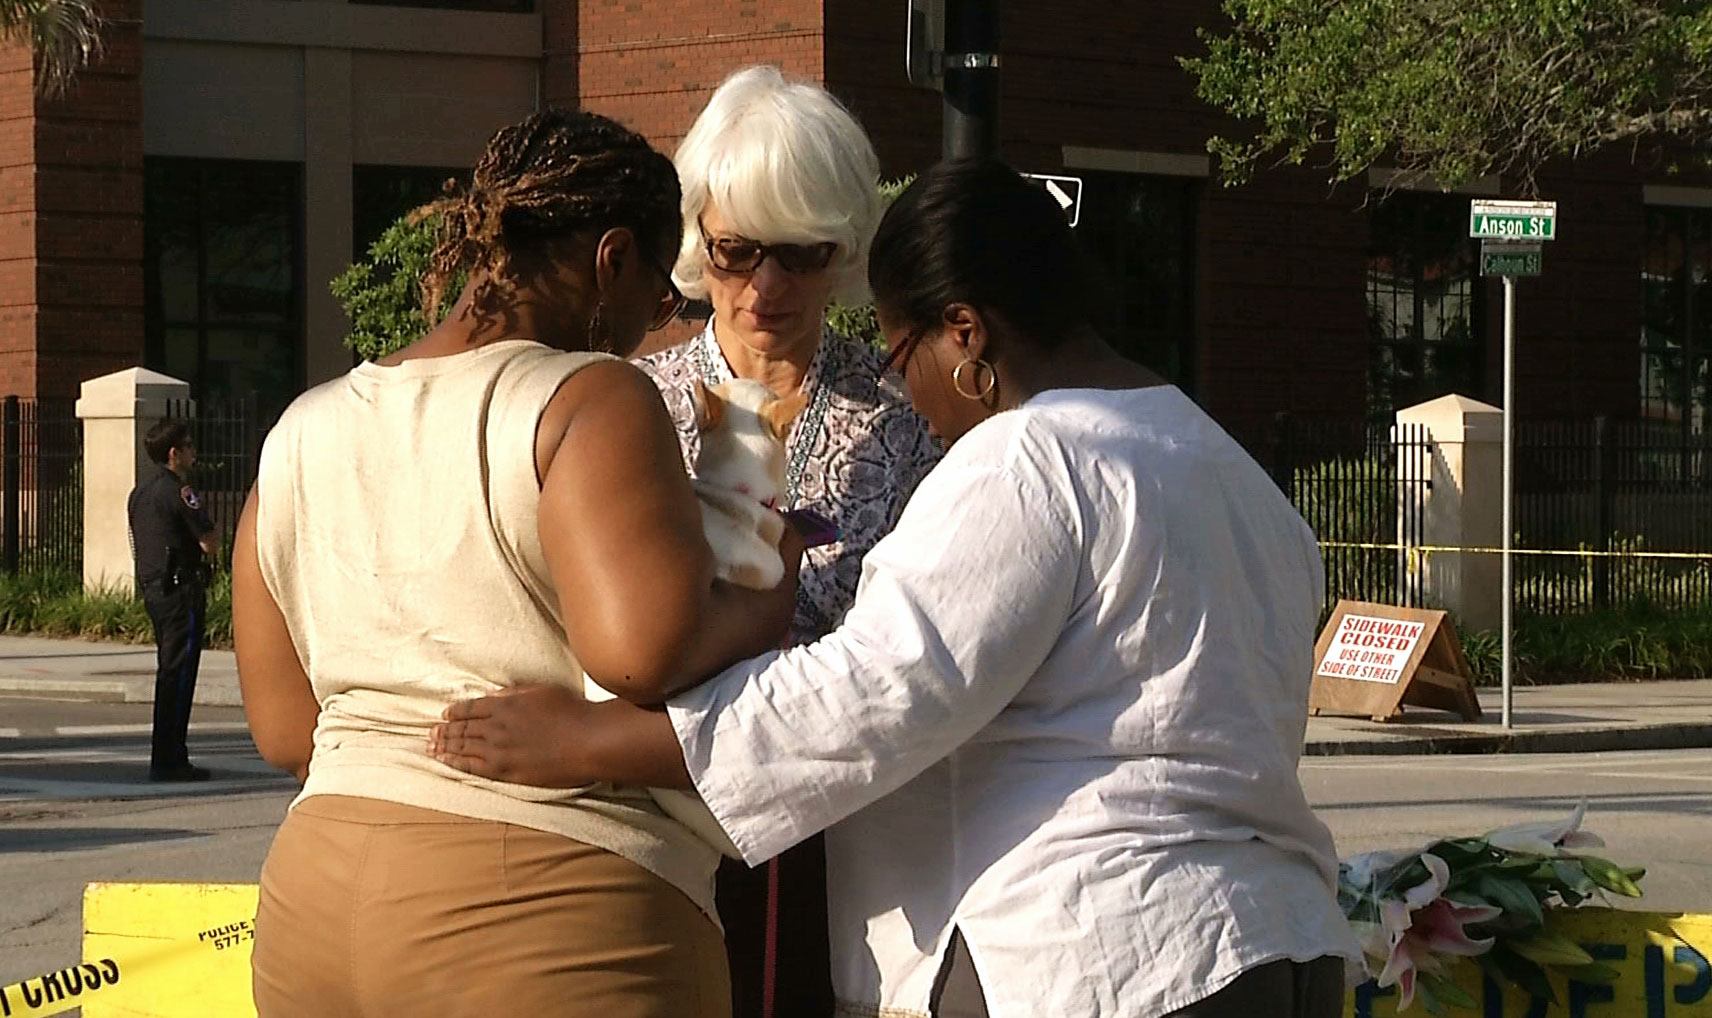  In this image taken from video on Thursday, June 18, 2015, Tarsha Moseley, left, Martha Watson, and Toby Smith pray at a makeshift memorial near Emanuel AME Church in Charleston, S.C. A white man opened fire during a prayer meeting inside the historic black church Wednesday night, killing several people. The shooter remained at large Thursday morning. (AP Photo/Alex Sanz)